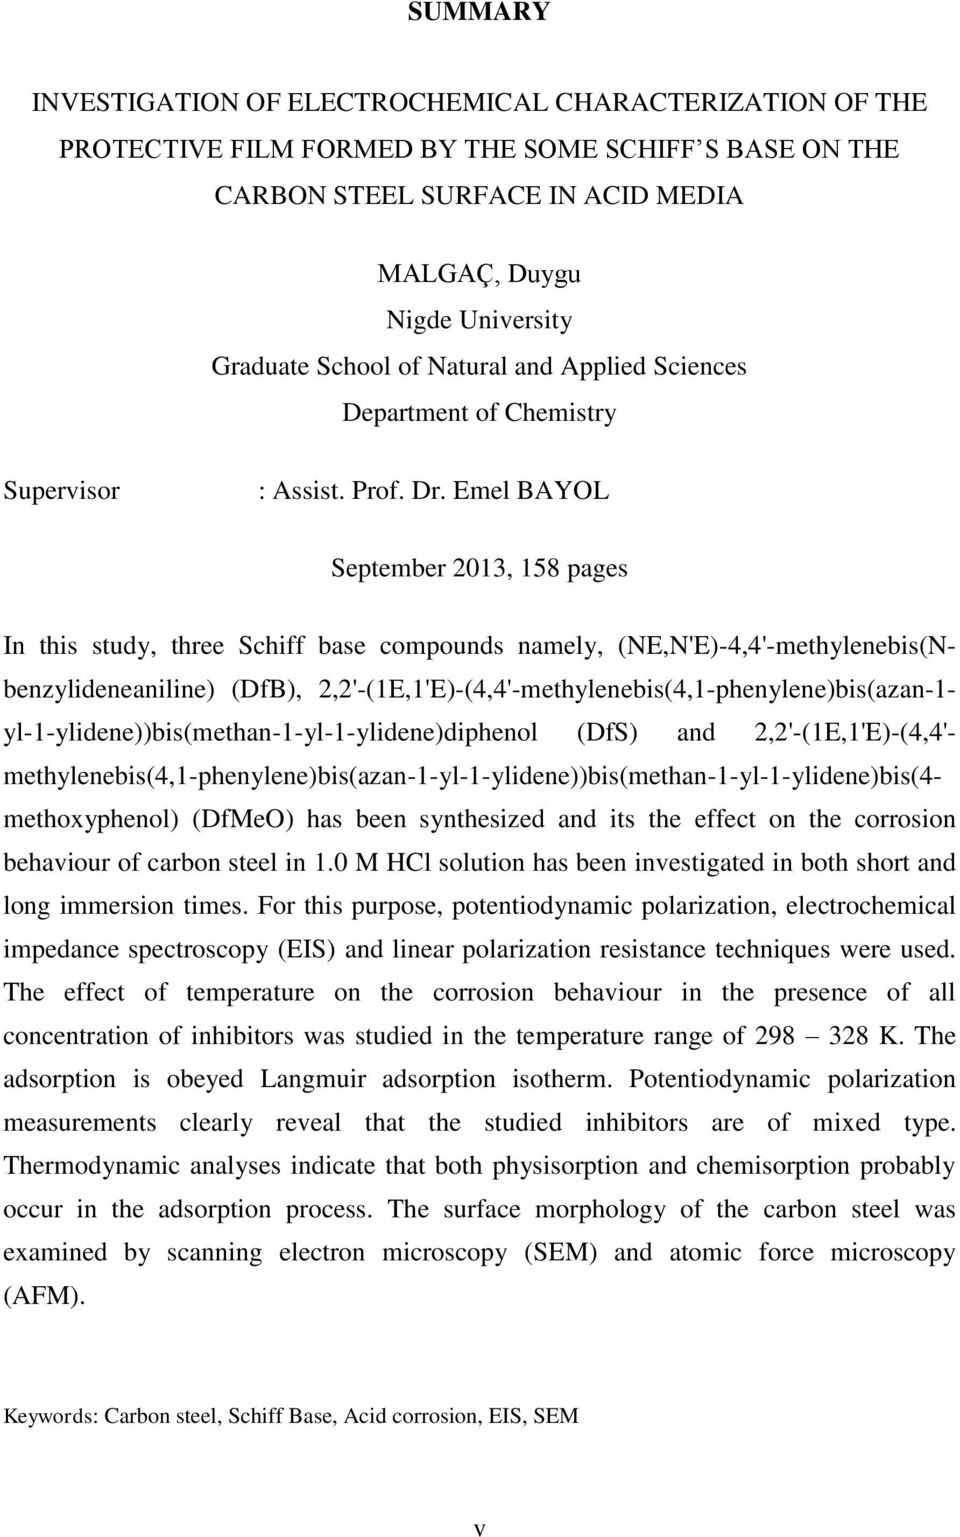 Emel BAYOL September 2013, 158 pages In this study, three Schiff base compounds namely, (NE,N'E)-4,4'-methylenebis(Nbenzylideneaniline) (DfB),